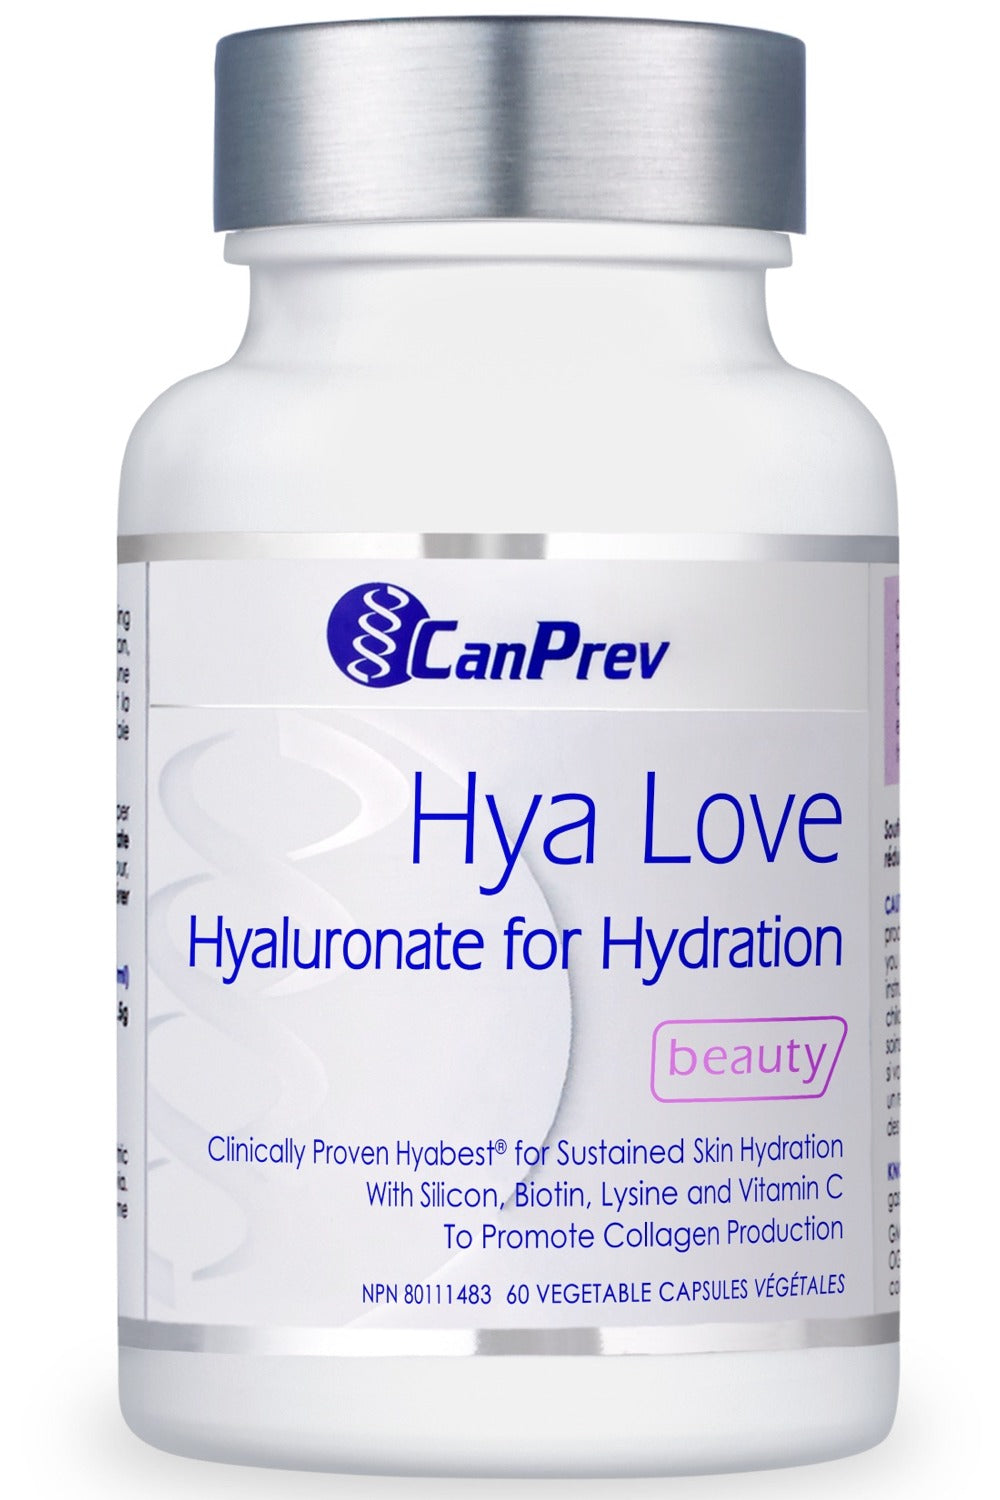 CANPREV Hya Love - Hyaluronate for Hydration (60 vcaps)